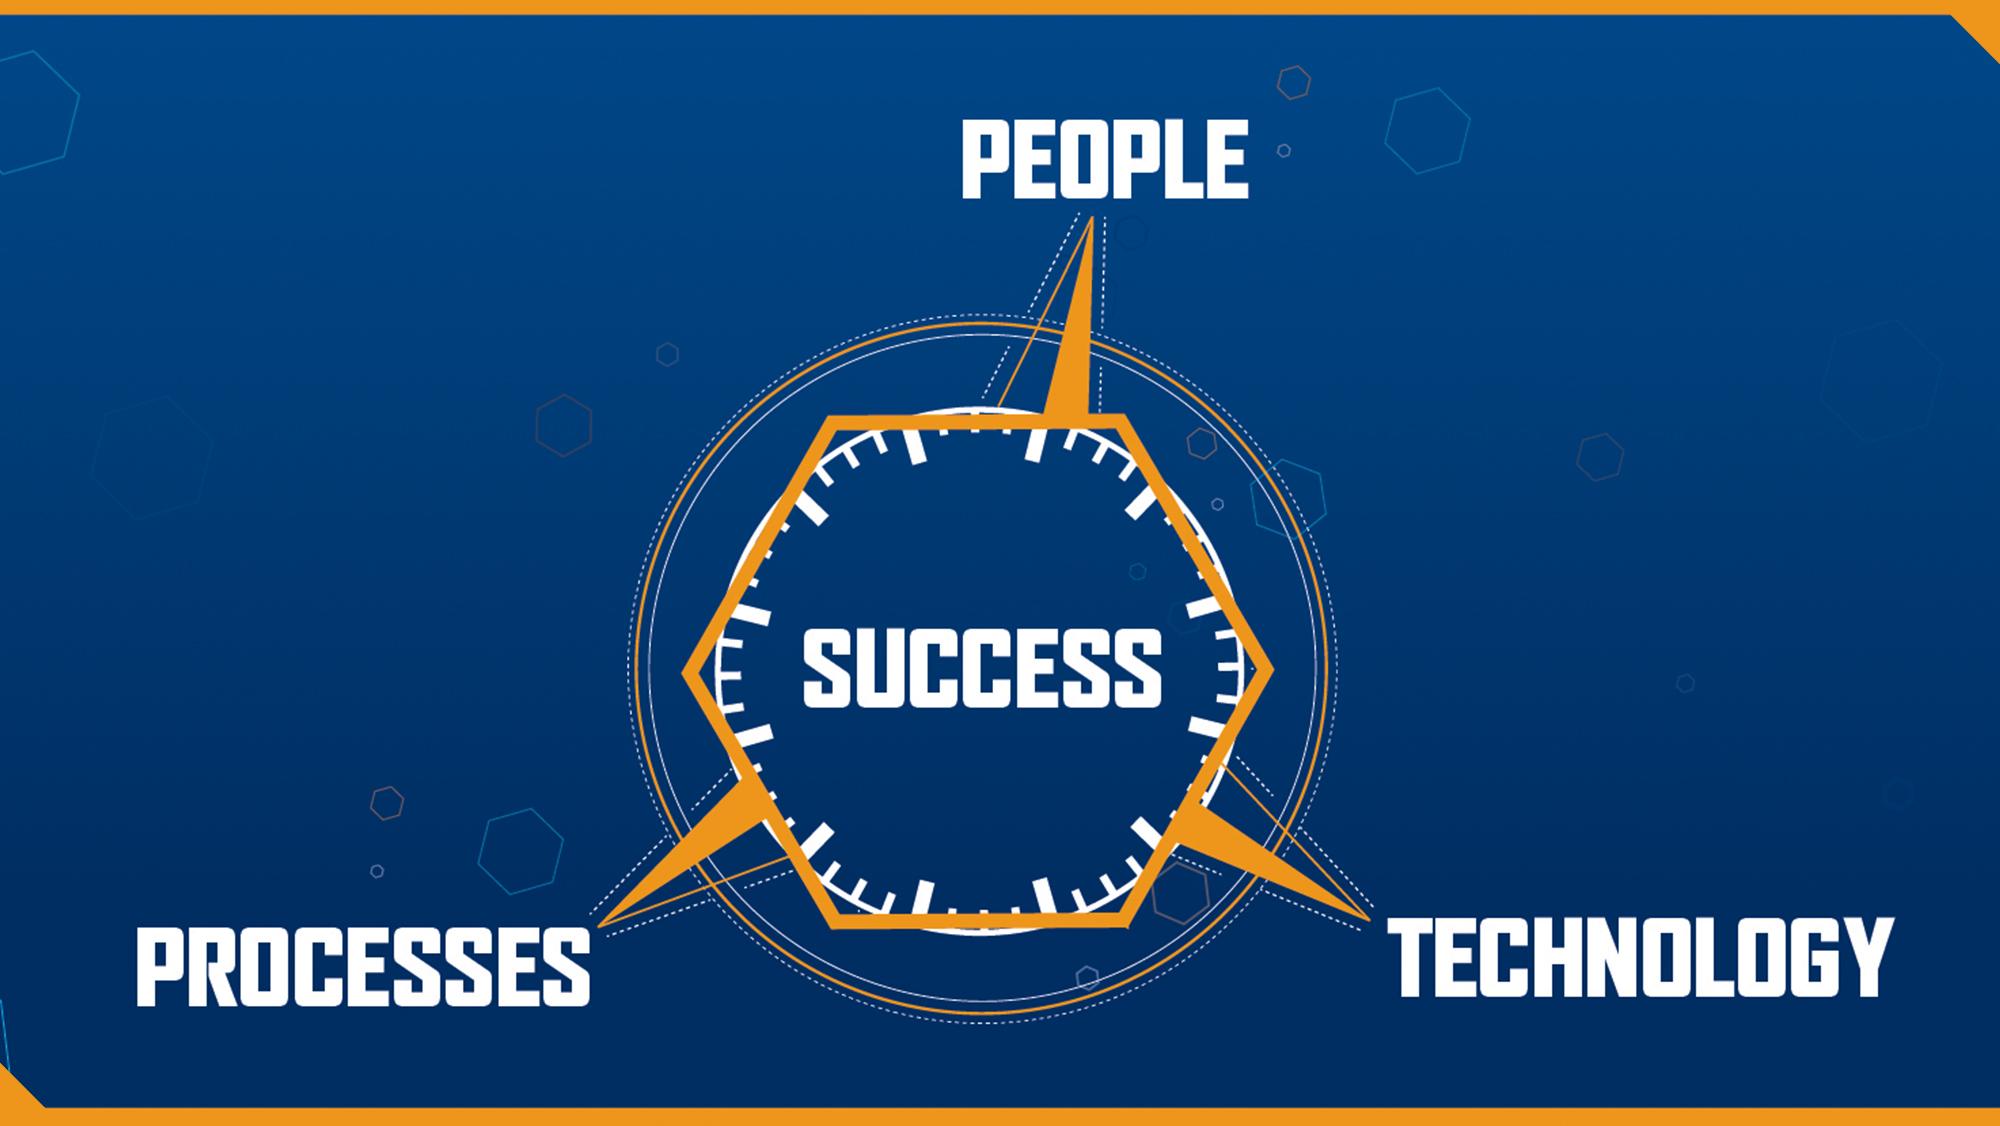 Digital Transformation needs people, technology and processes to be successful. 